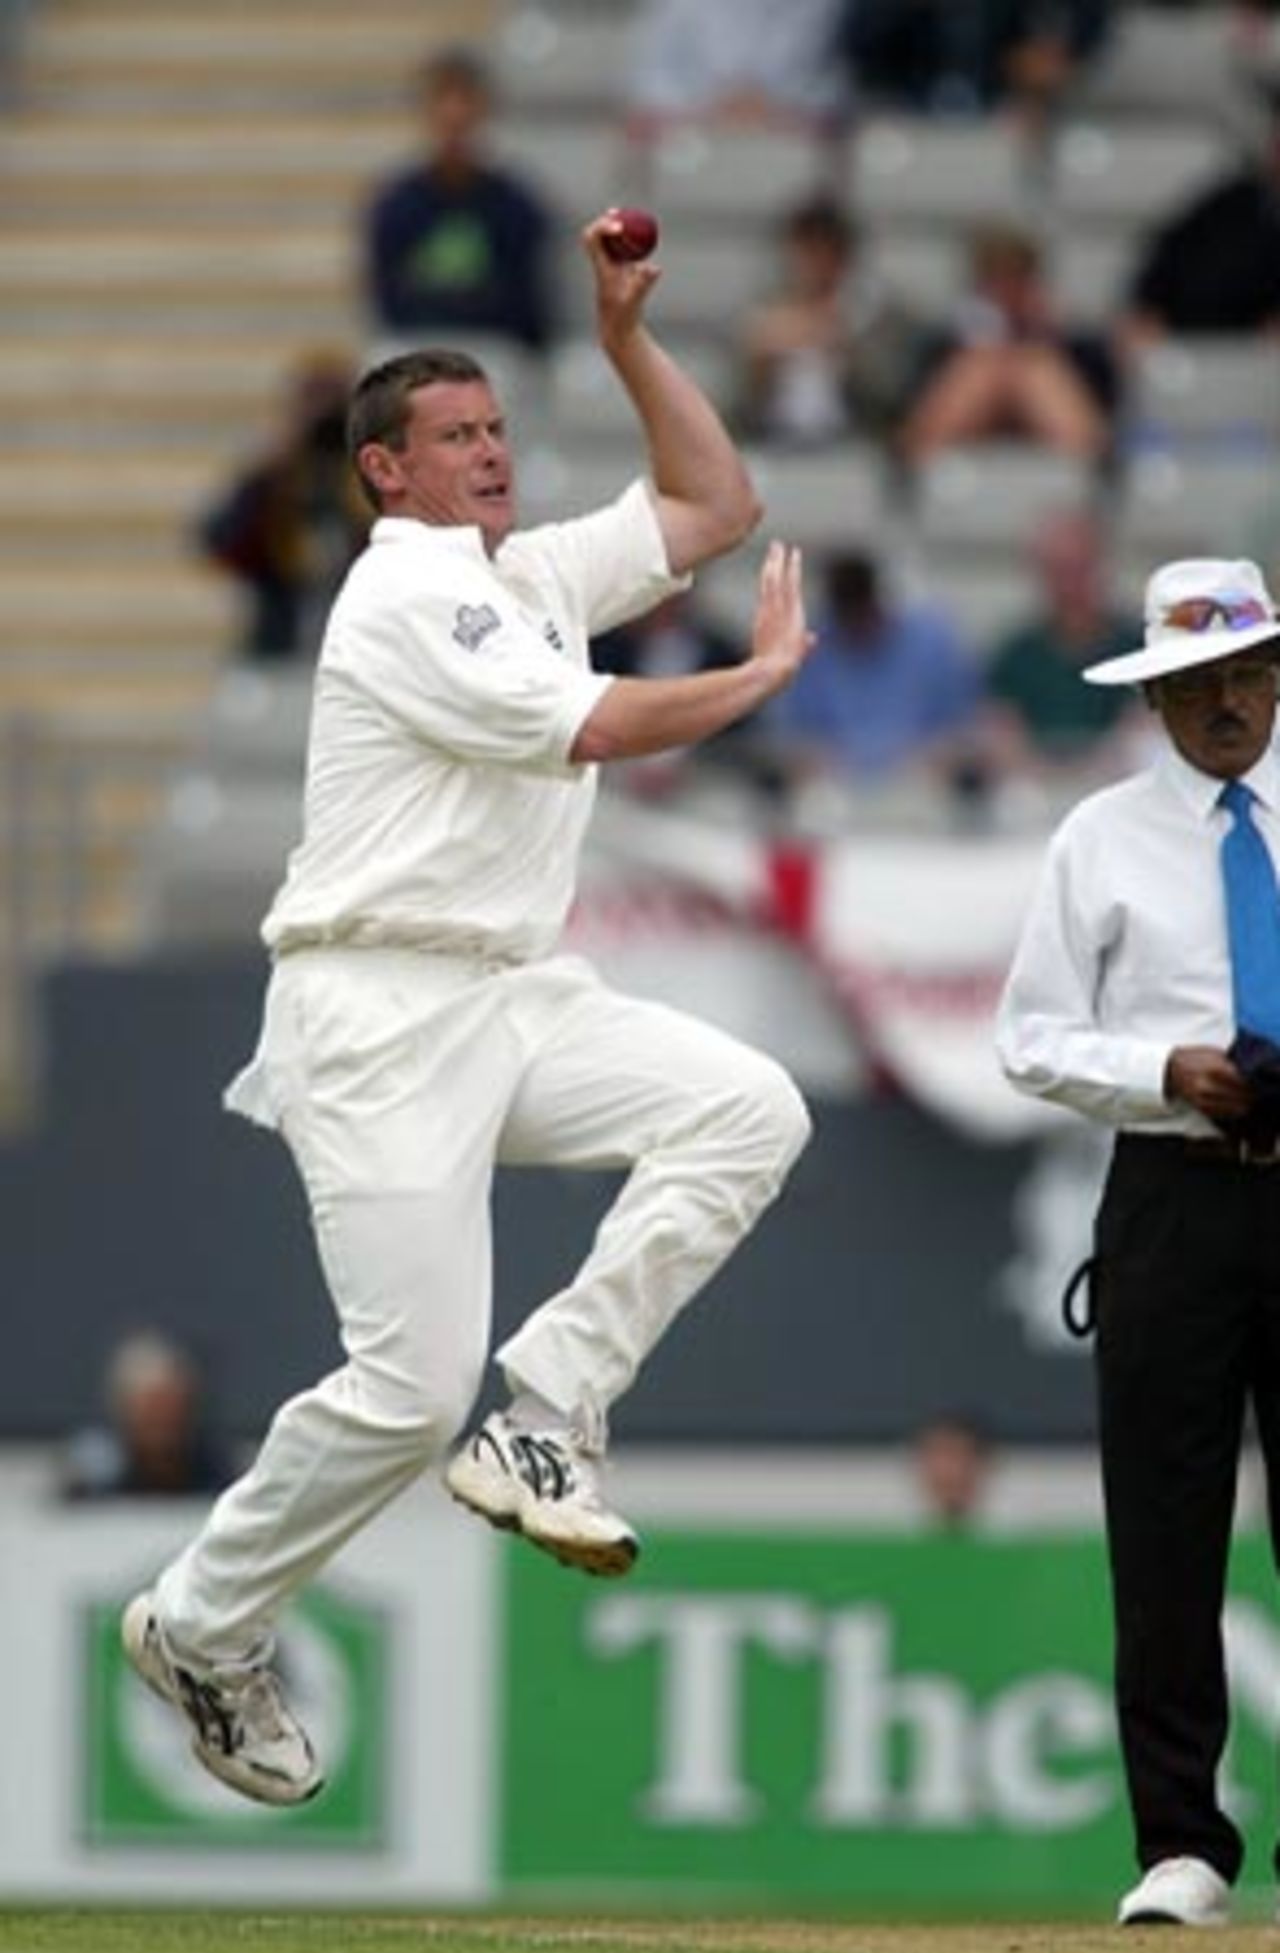 England bowler Ashley Giles delivers a ball during his first day spell of 0-1 from one over. Umpire Srinivas Venkataraghan from India looks on. 3rd Test: New Zealand v England at Eden Park, Auckland, 30 March-3 April 2002 (30 March 2002).